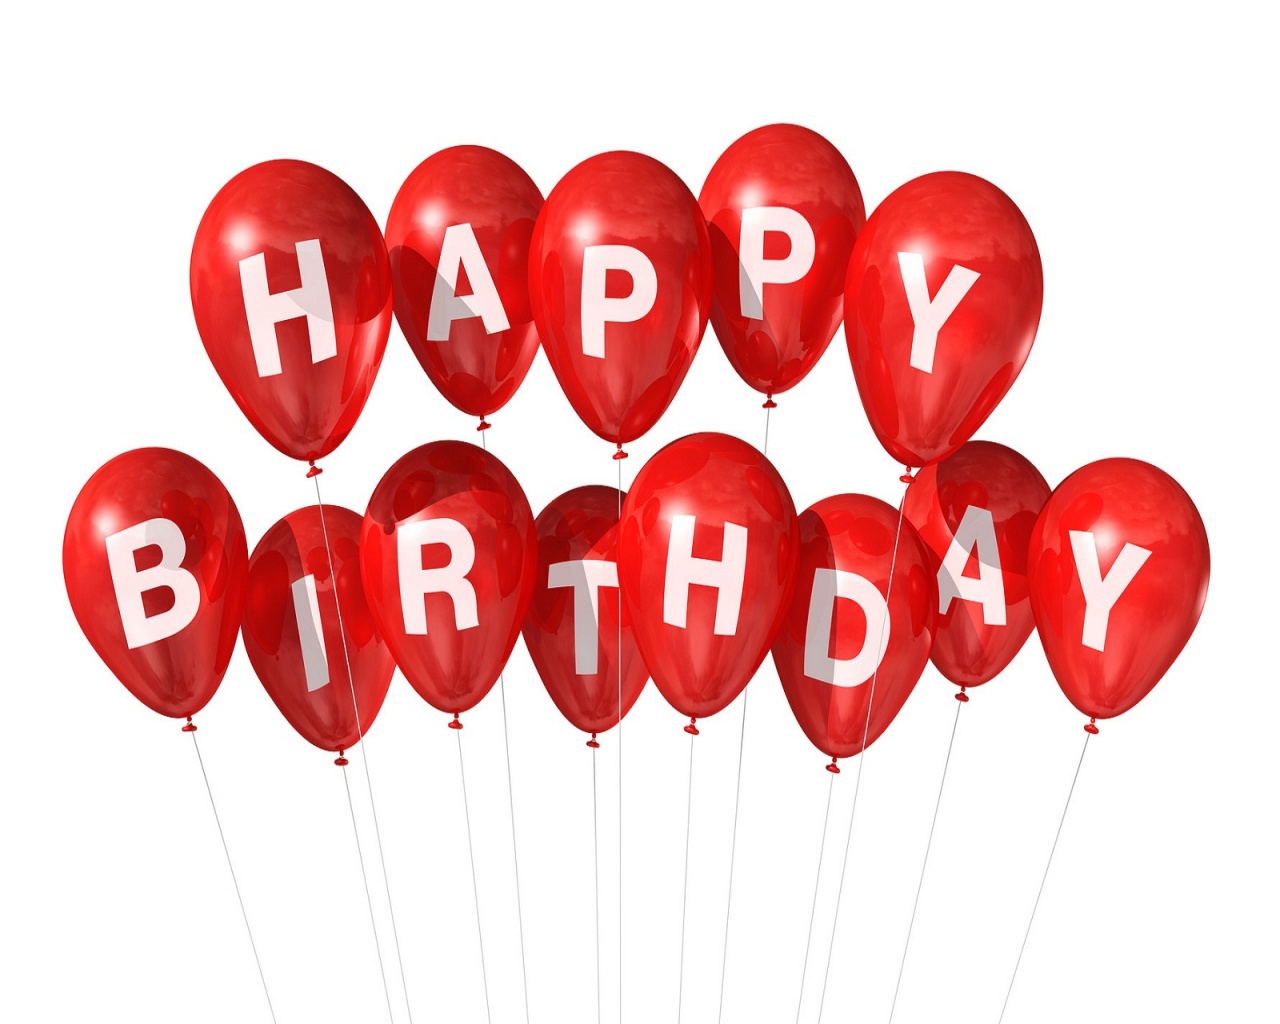 Clip Arts Related To : happy birthday balloon hd. 